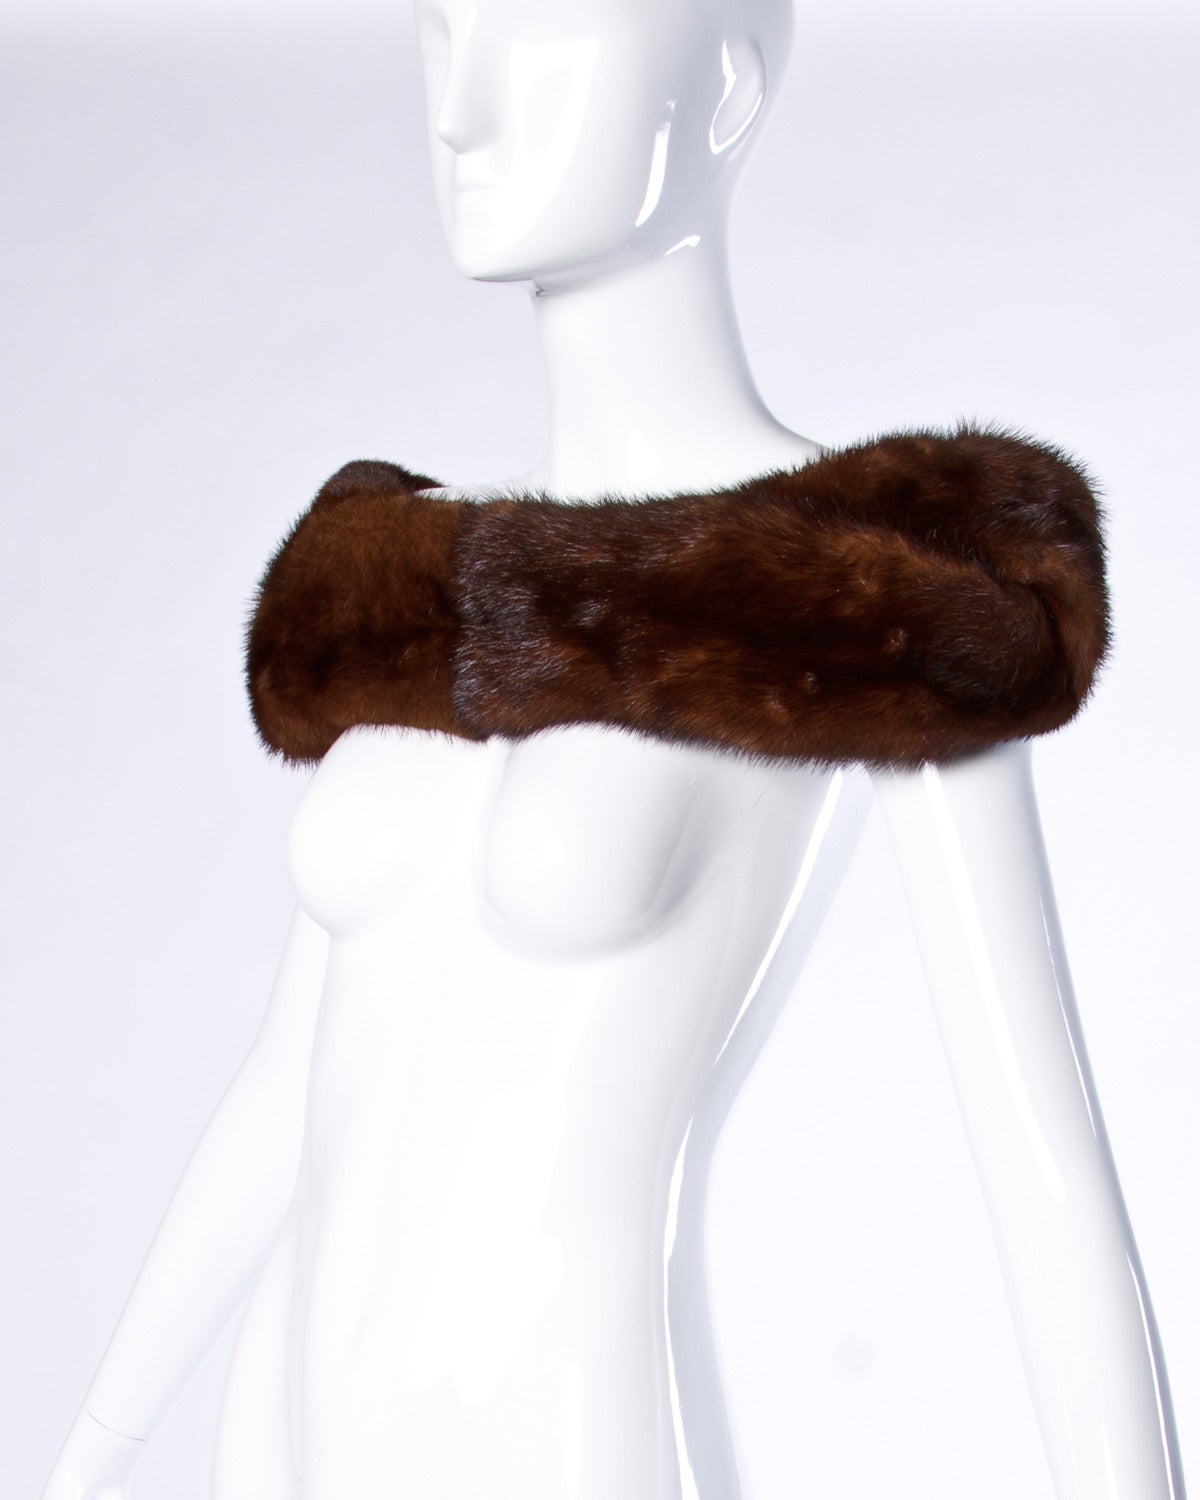 Vintage brown mink fur shoulder wrap or stole. This piece can be worn many different ways! Long luxurious guard hairs and high quality fur.

Details:

Fully Lined
Hook Closure
Color: Brown

Measurements:

Width: 4